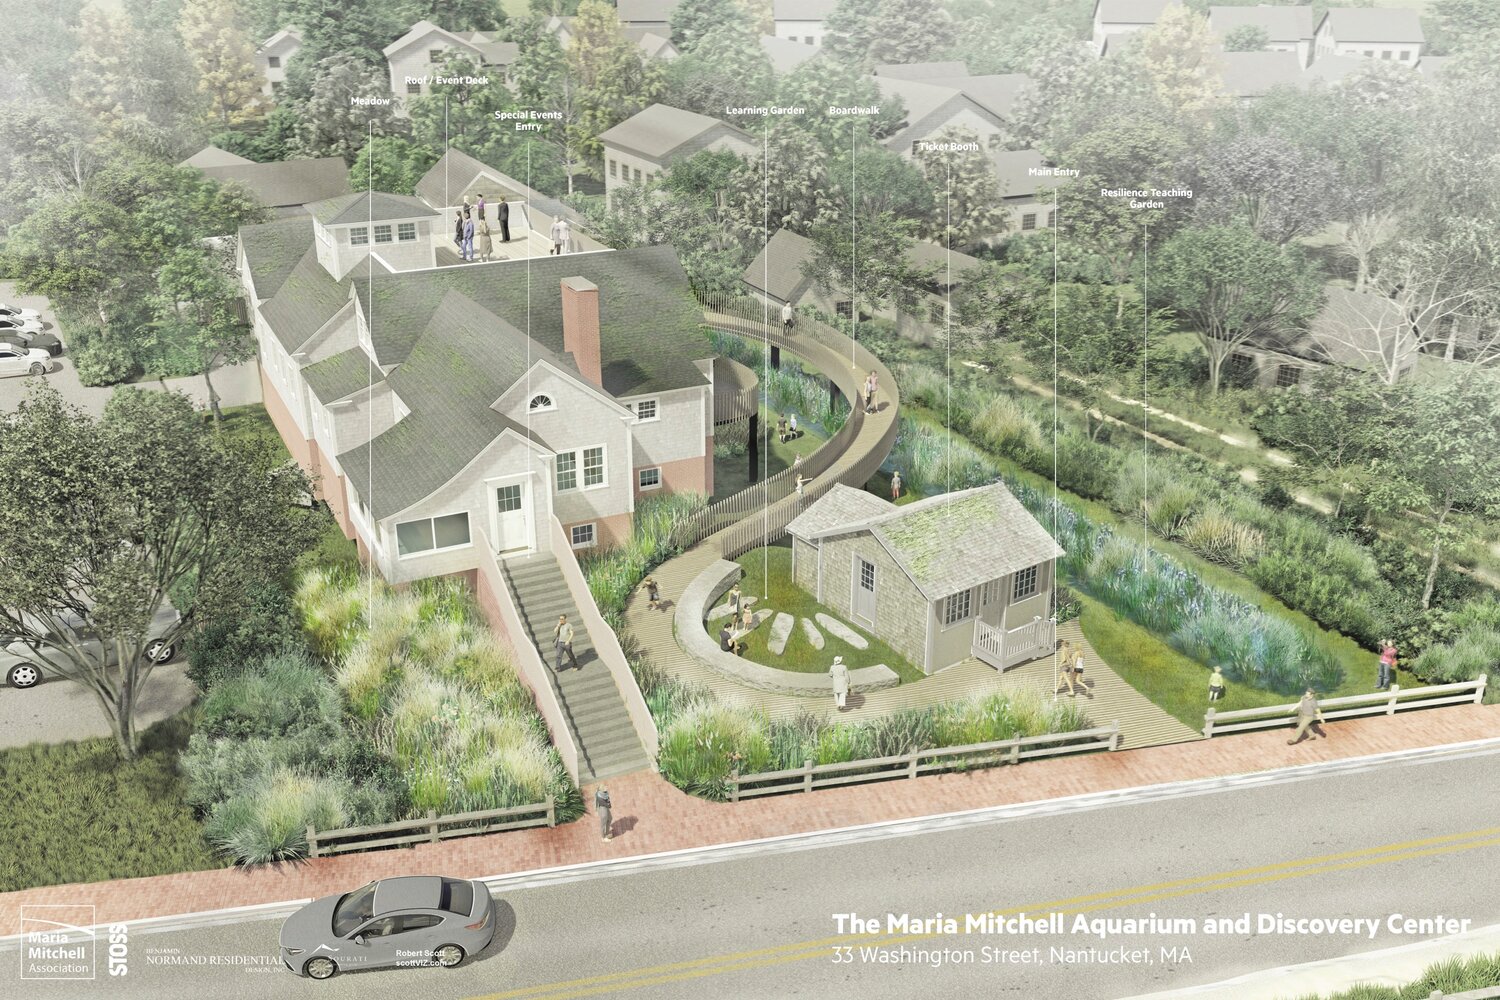 A rendering of the new aquarium and learning center the Maria Mitchell Association is hoping to build on Washington Street across from its current aquarium by 2029.